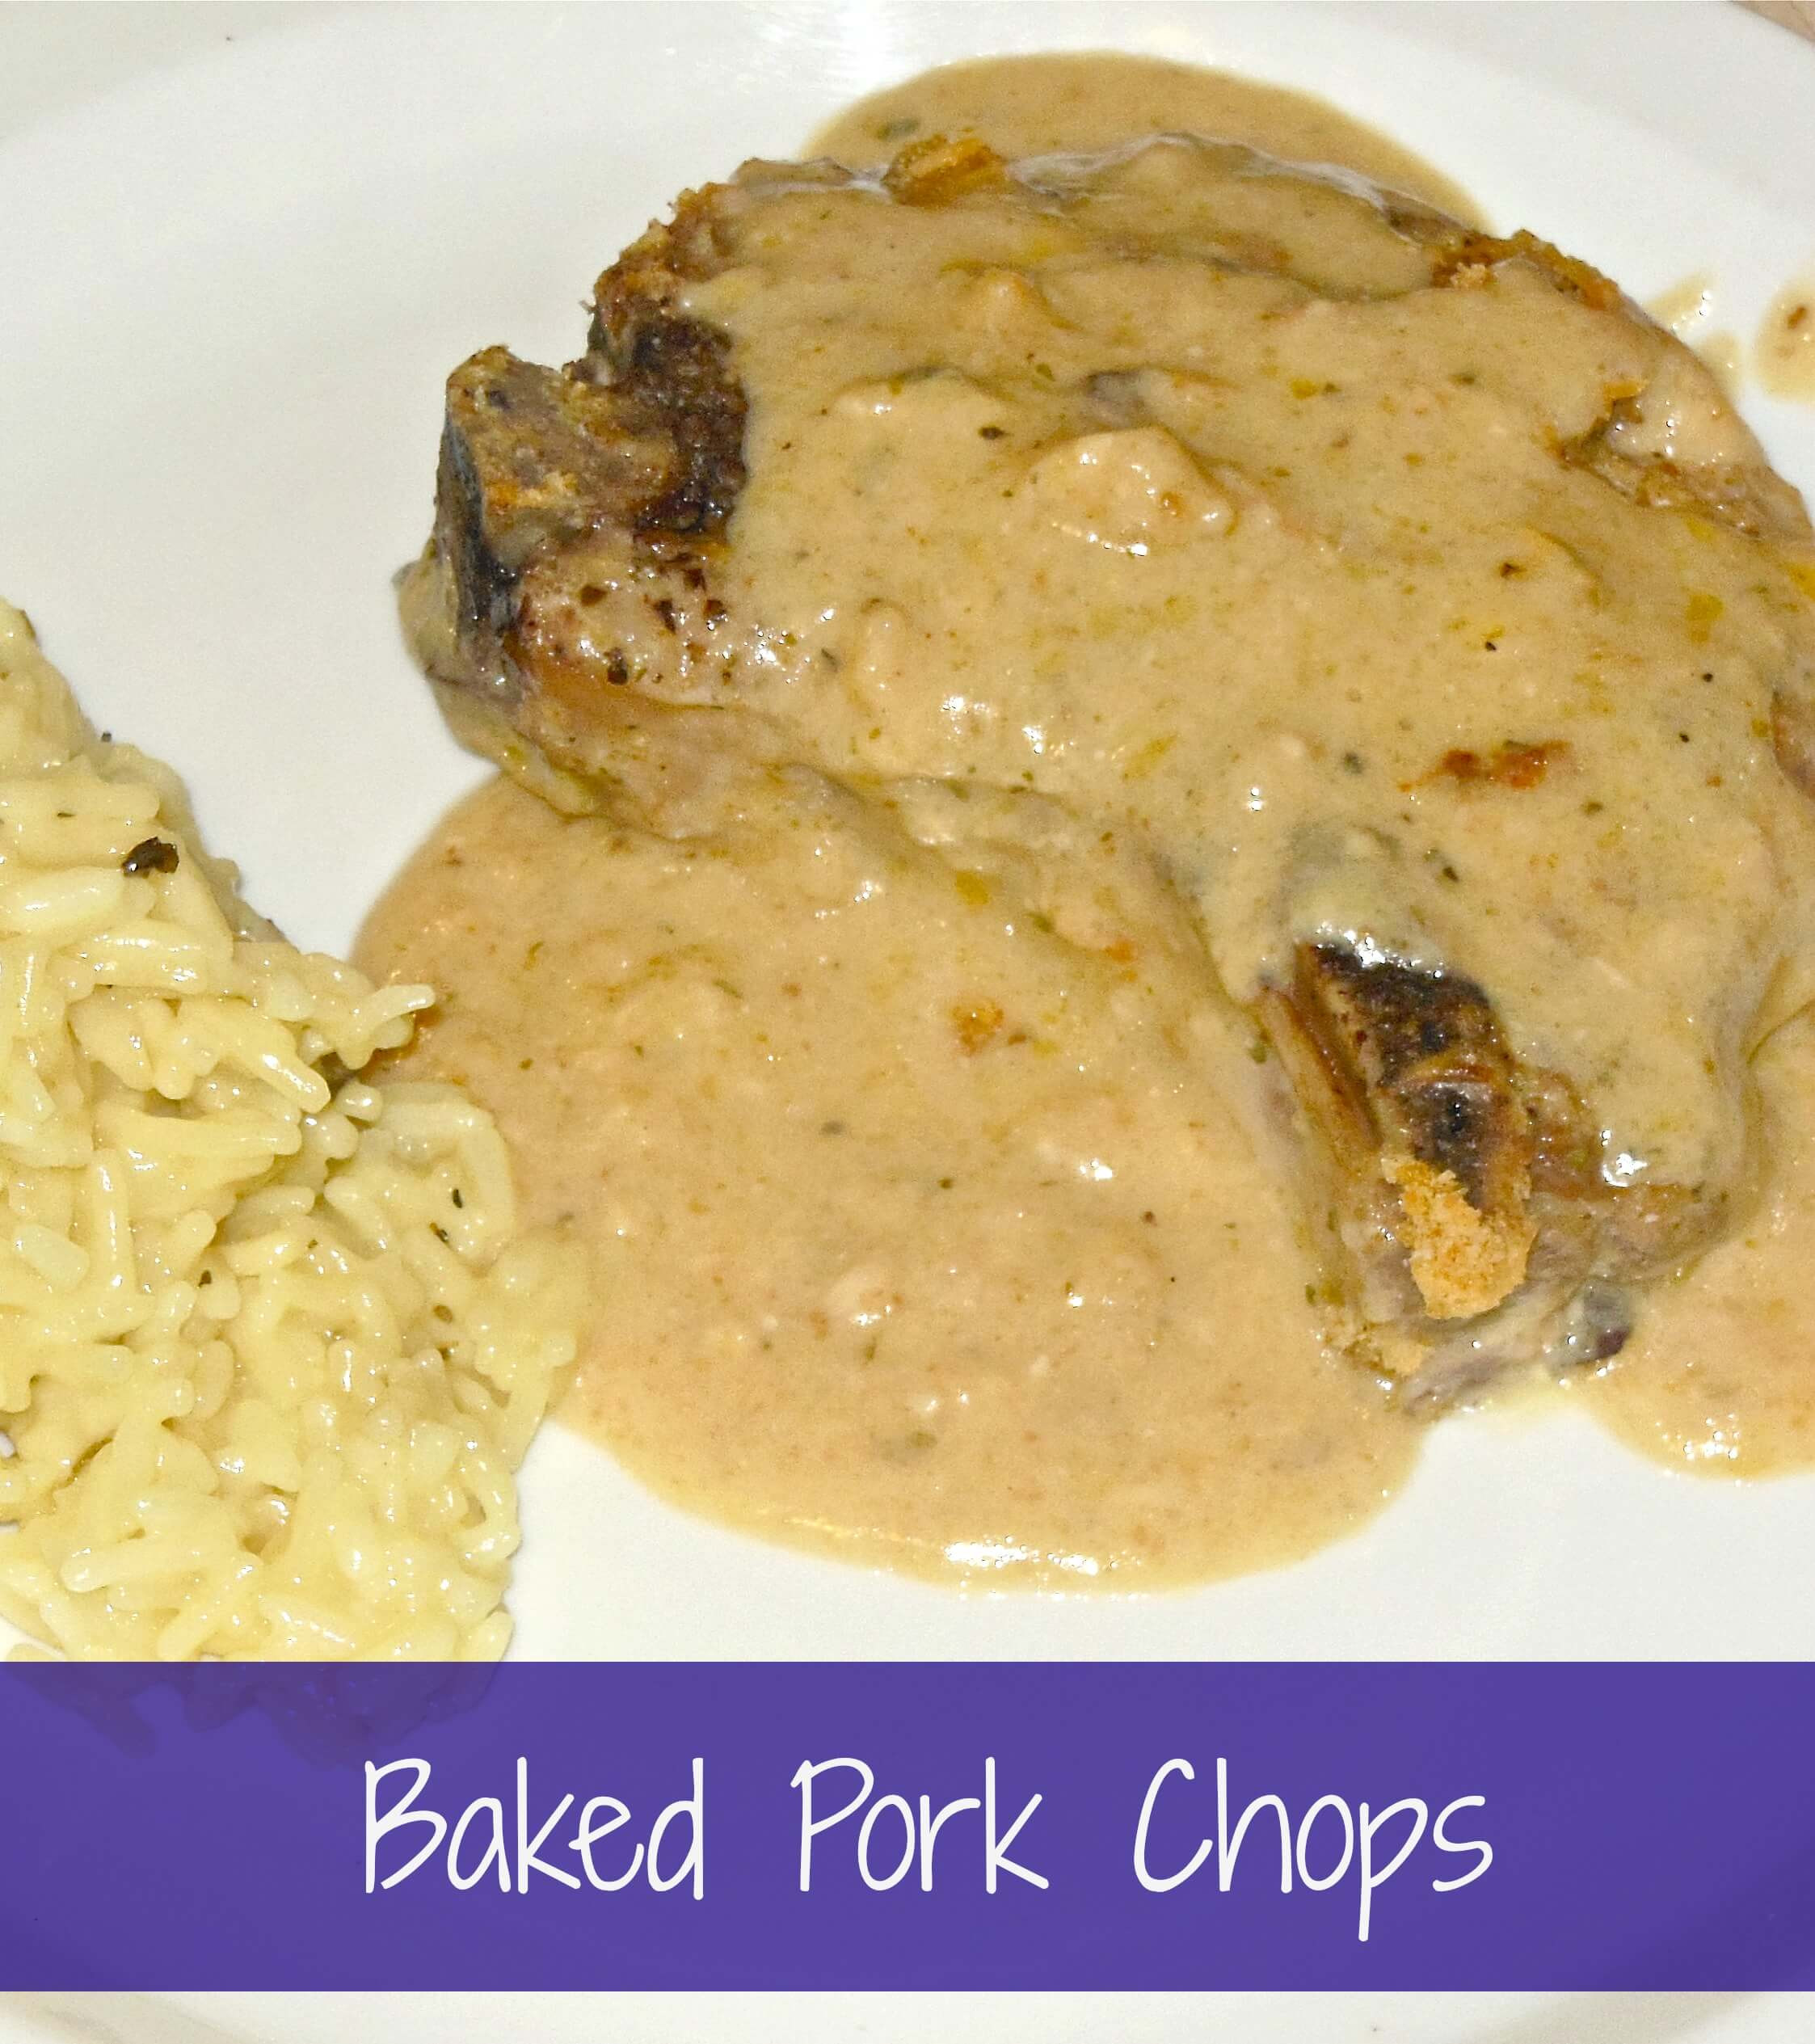 Baked Pork Chops
 Delicious Baked Pork Chops in a Low Fat Creamy Sauce